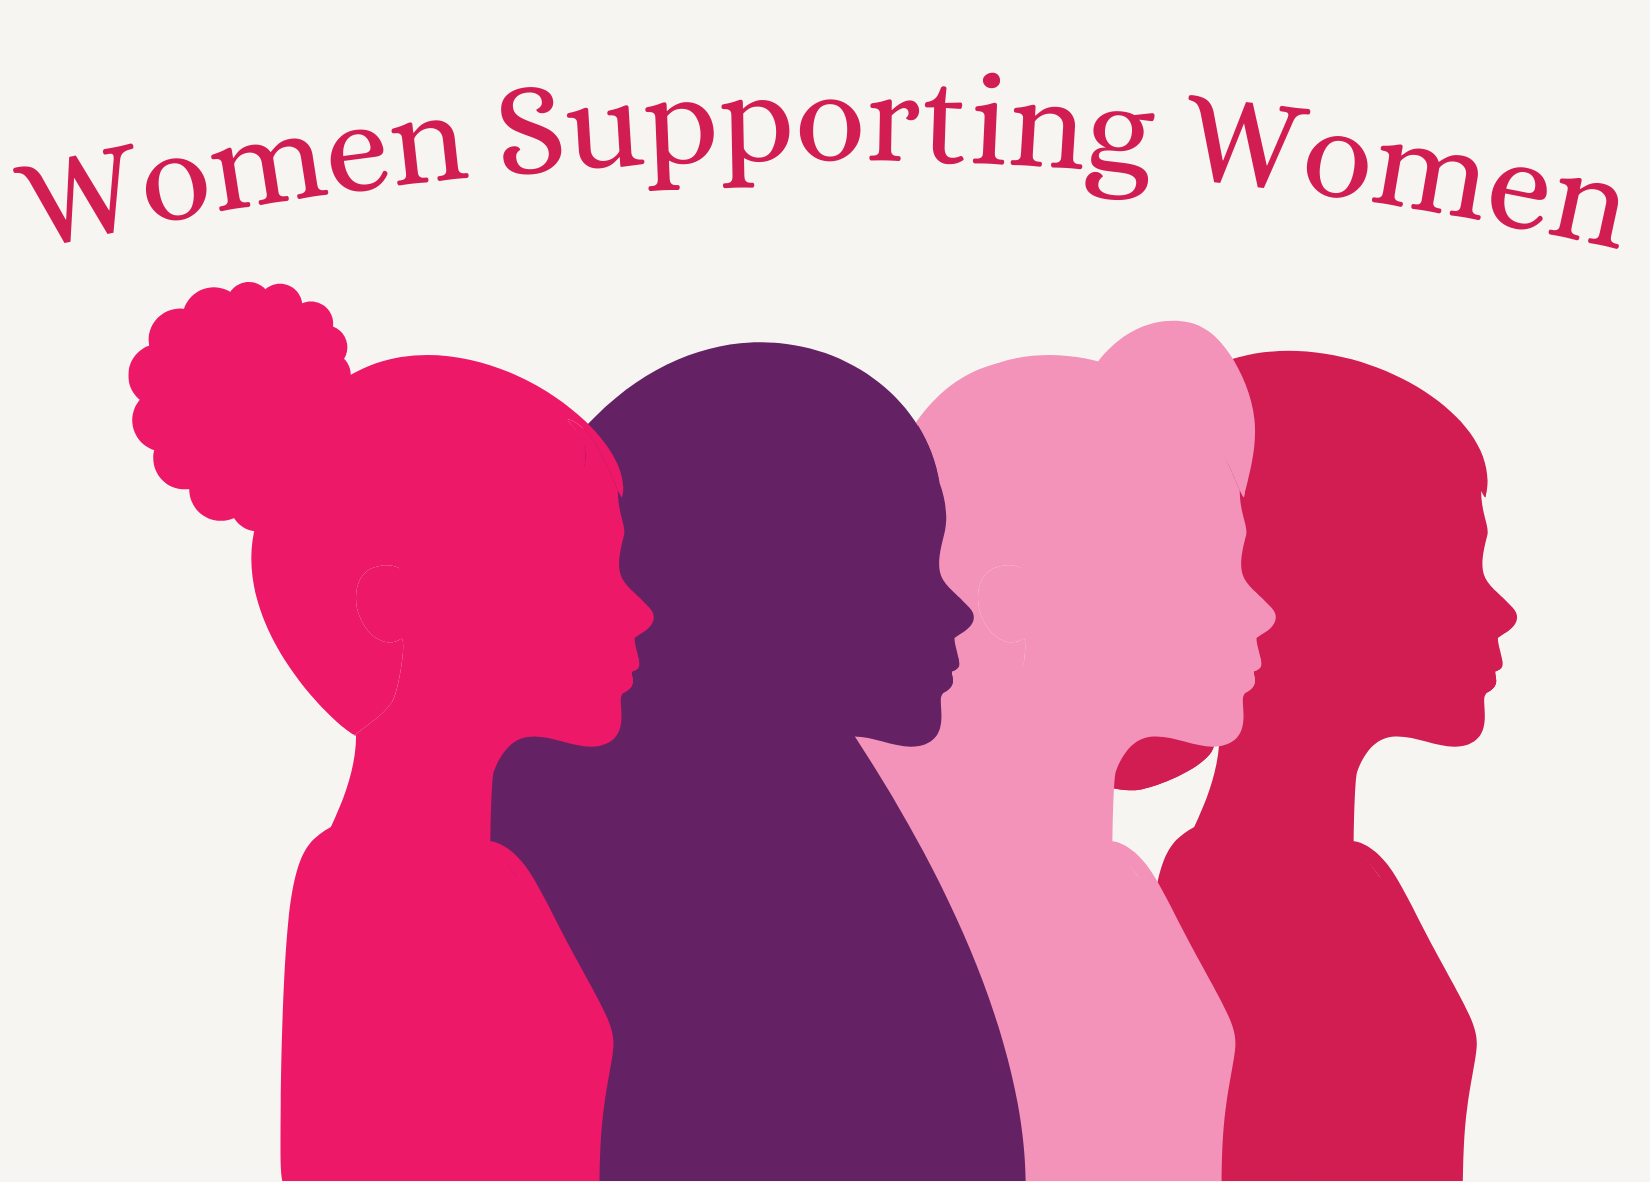 Women Supporting Women: Why it’s Essential